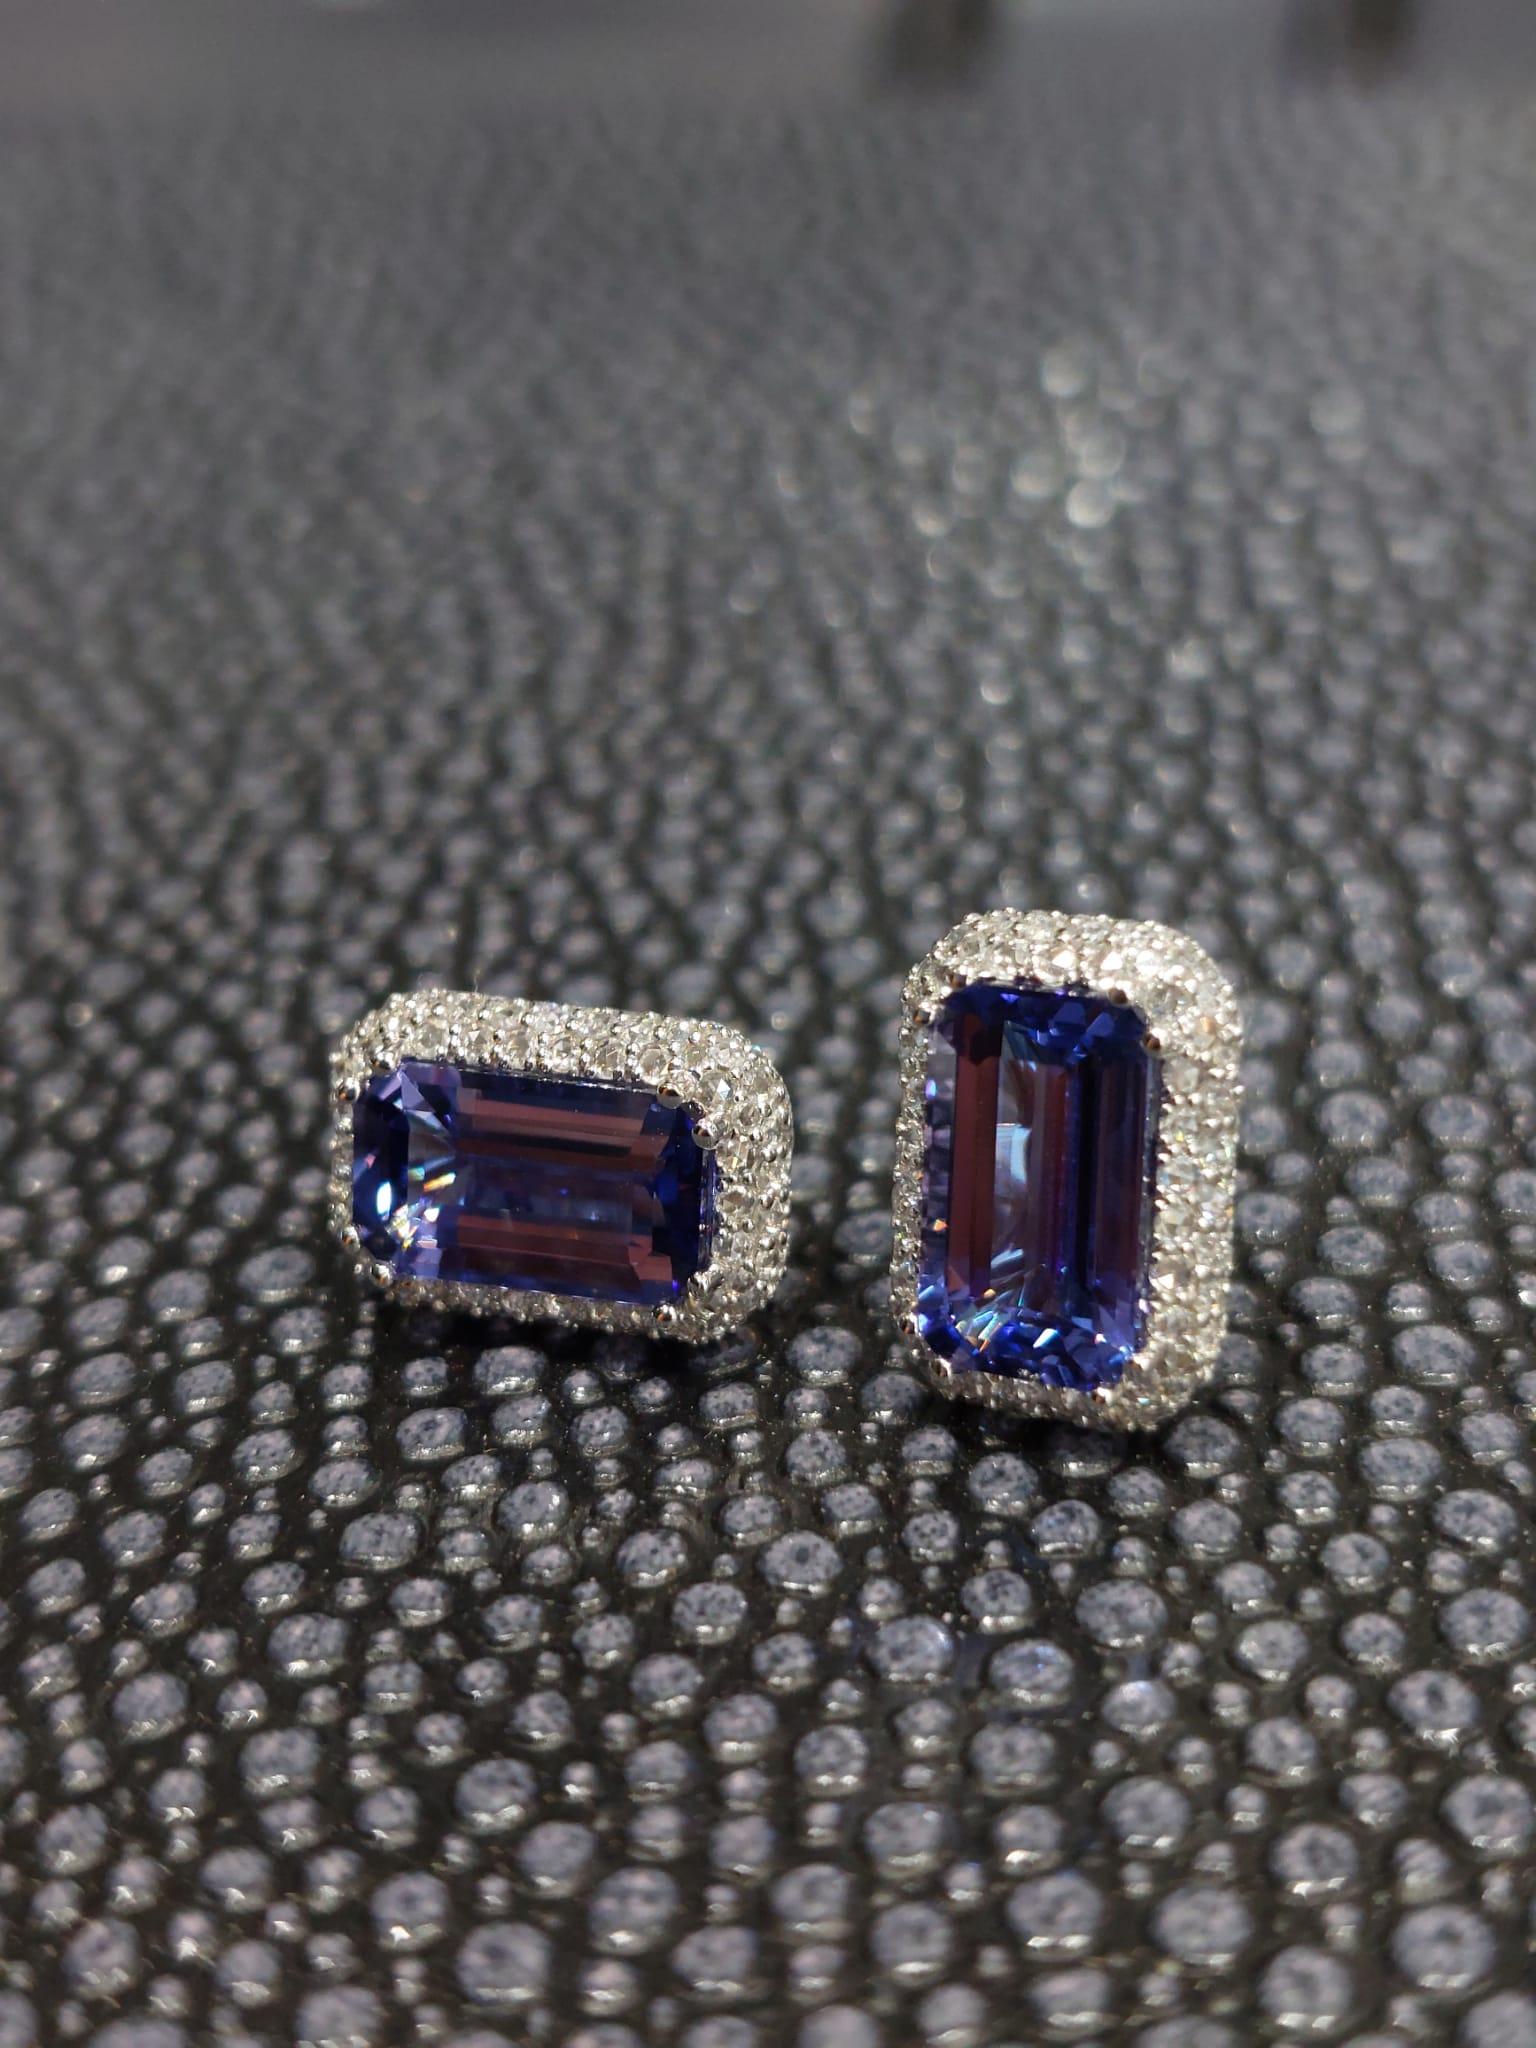 Tanzanite is a very rare gem known for its enigmatic and magical beauty, believed to possess transmutational abilities that can assist in transforming one's spirit.

The earring setting with center tanzanite total weight 3.38 carat, the diamond